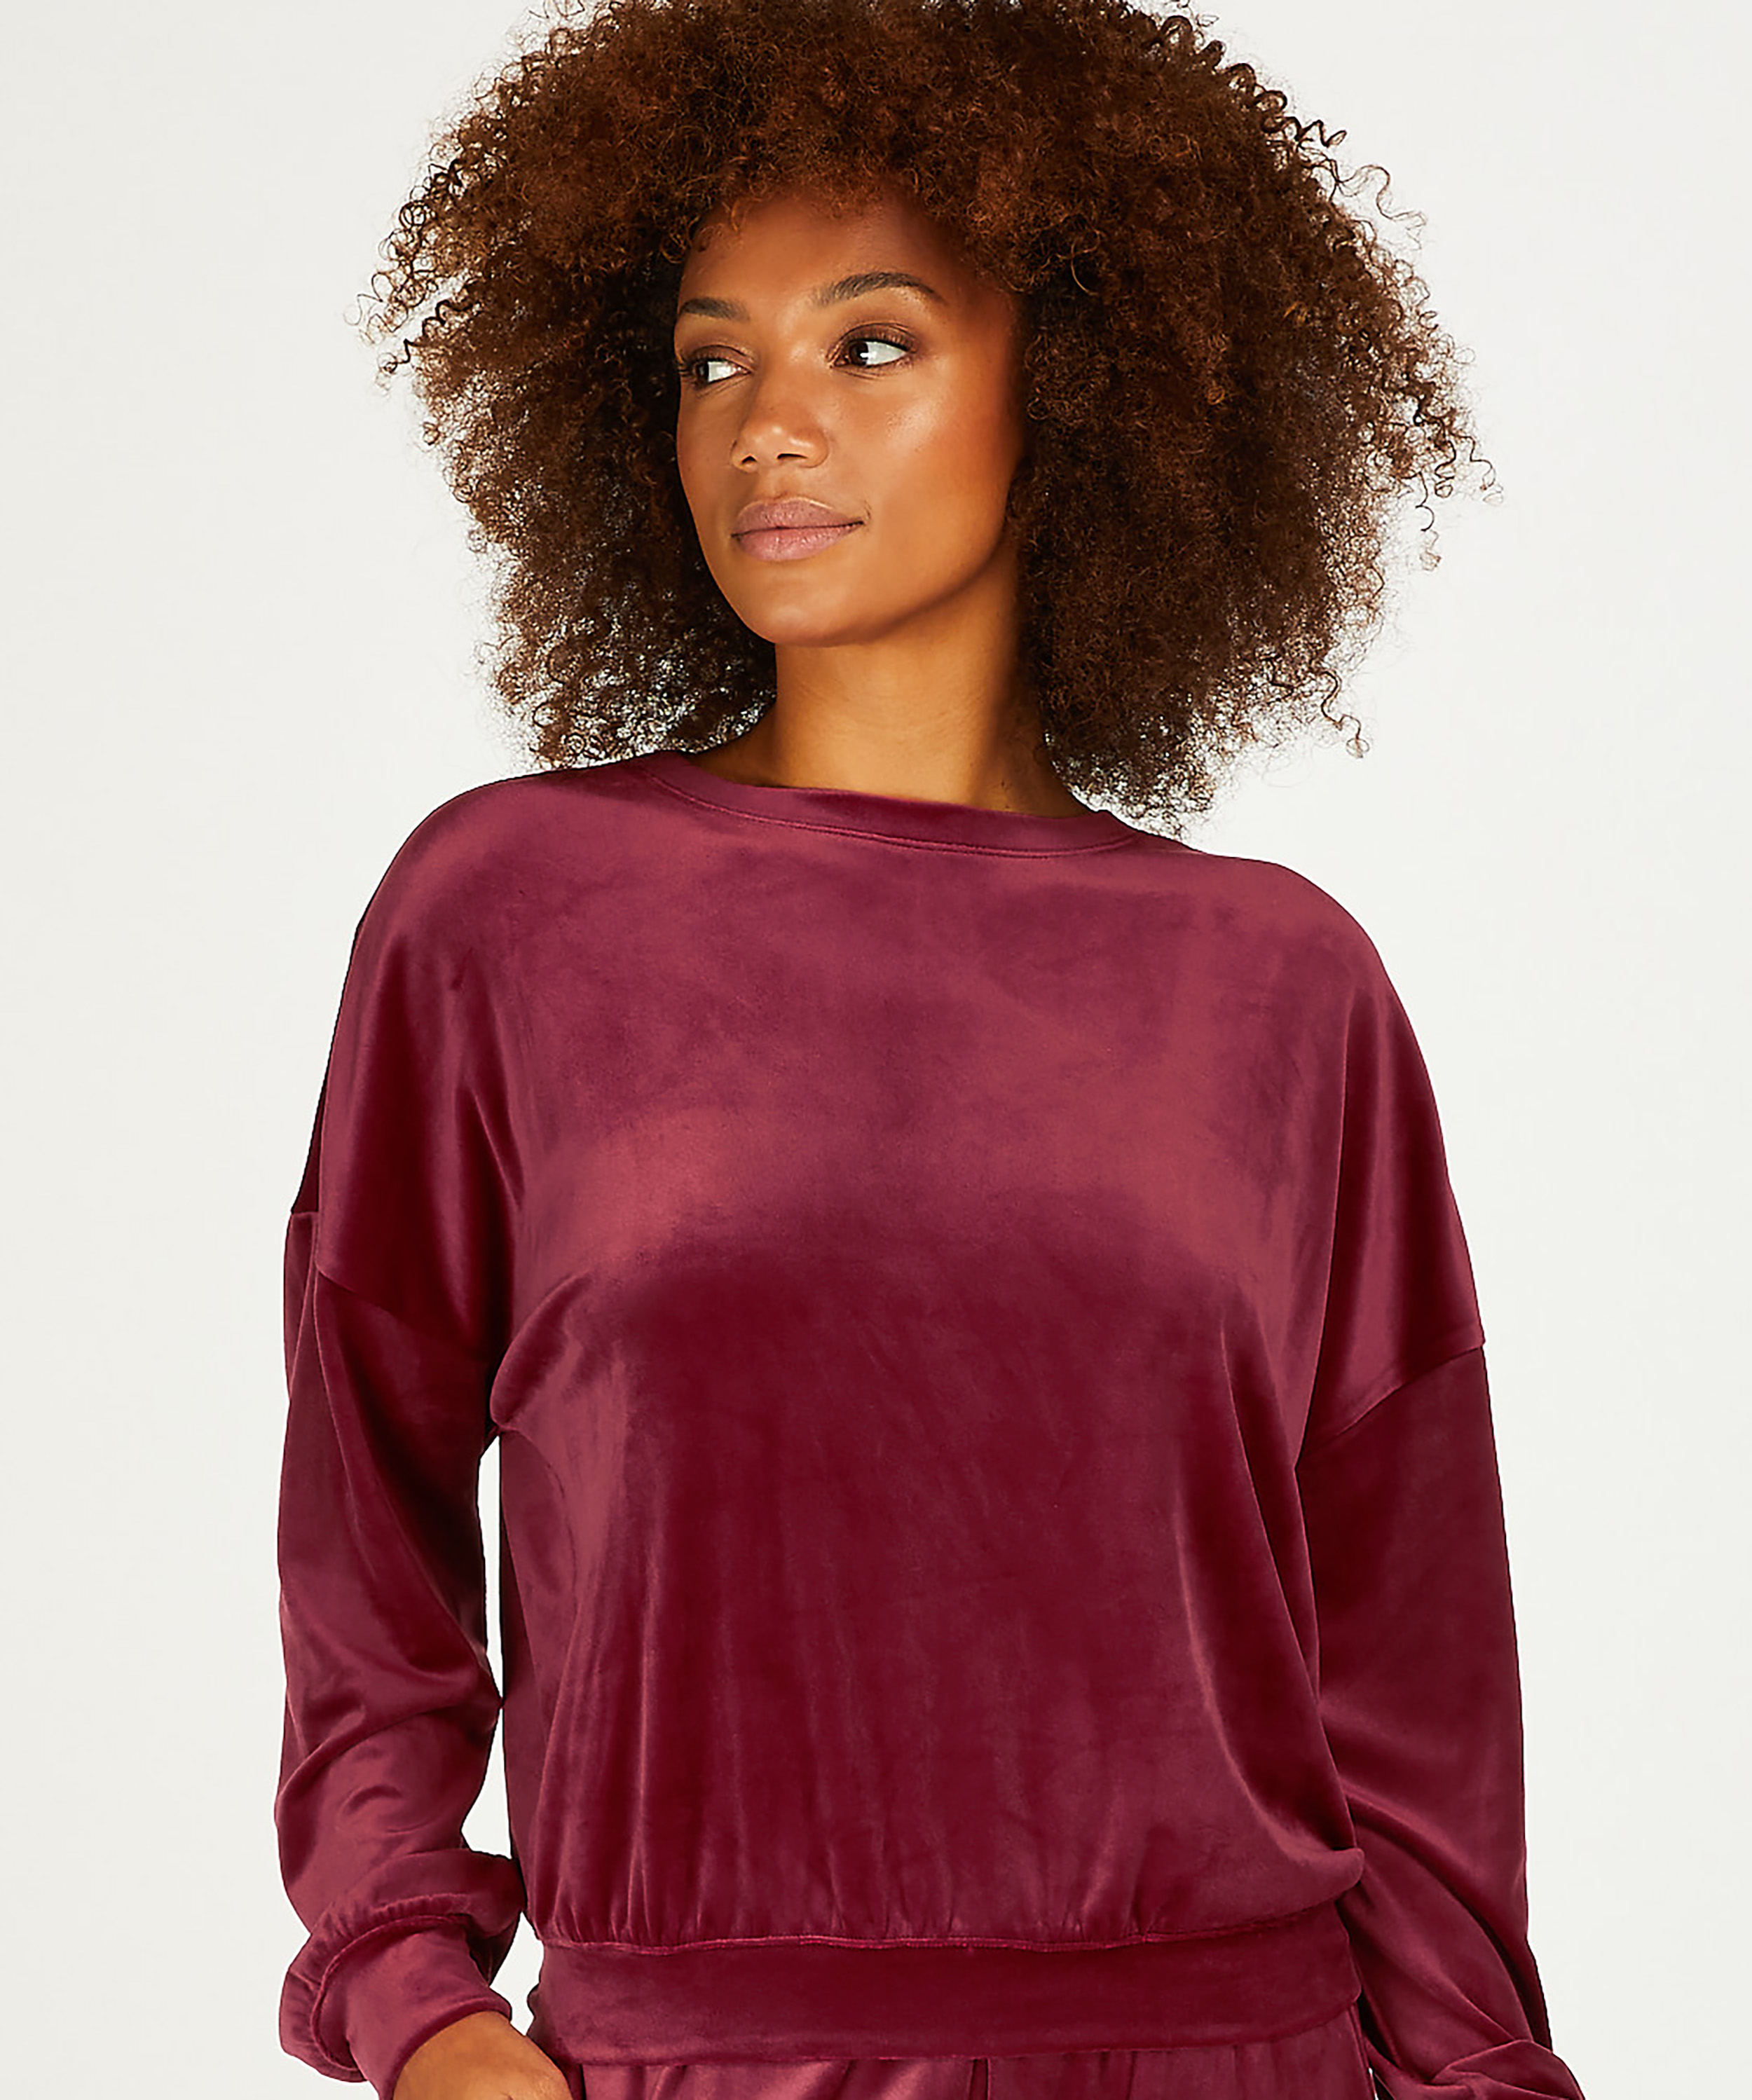 Velours Top, Red, main